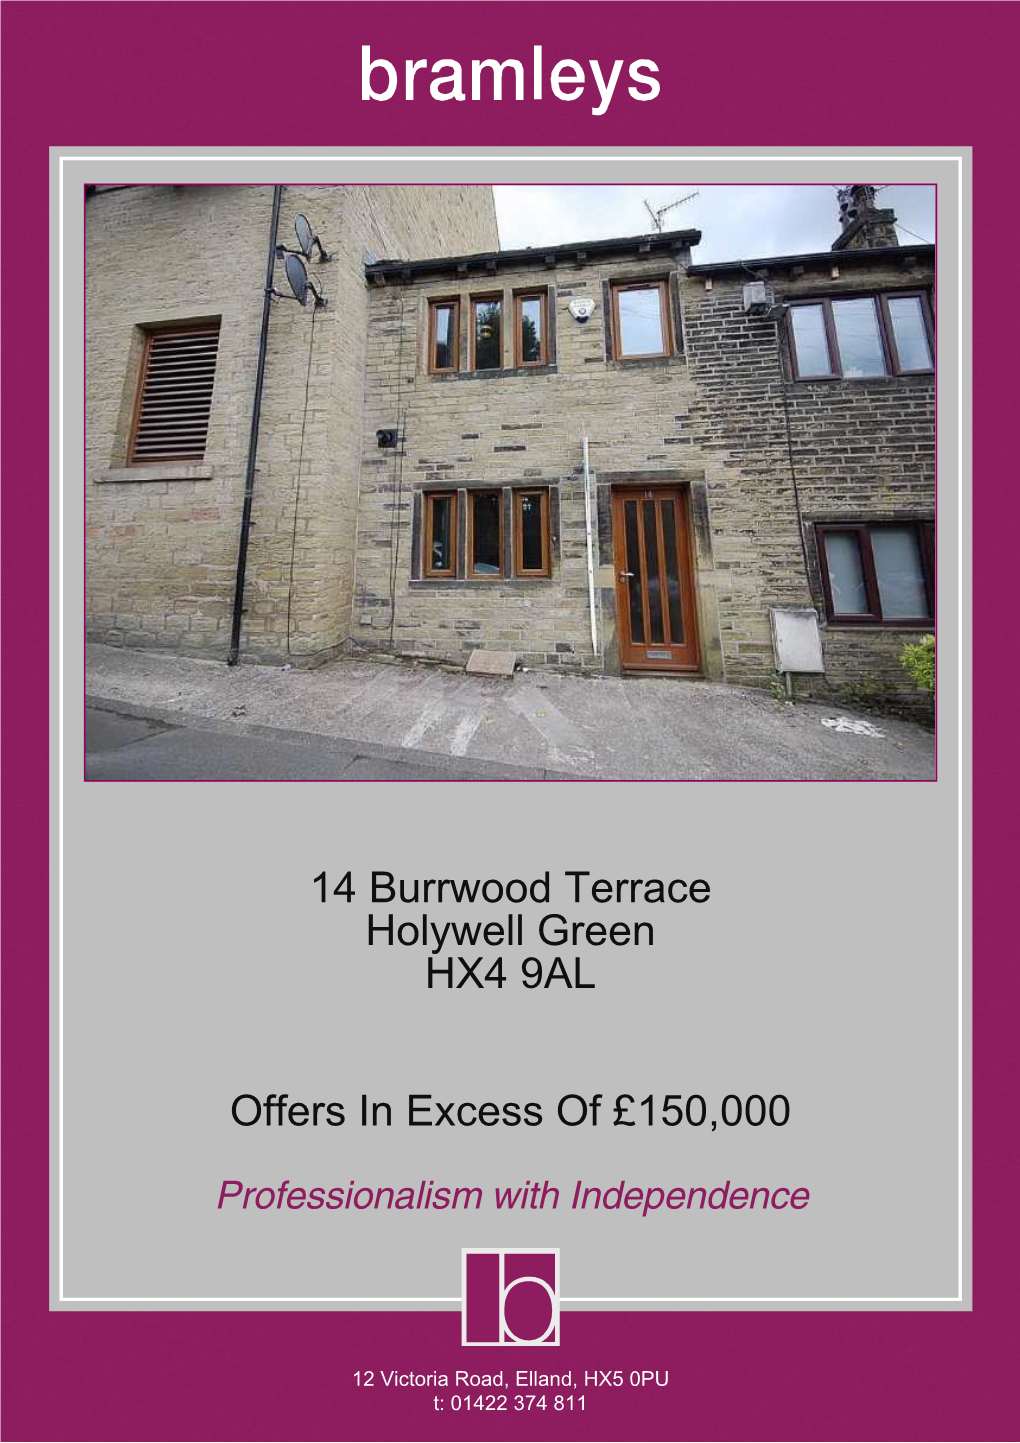 14 Burrwood Terrace Holywell Green HX4 9AL Offers in Excess Of